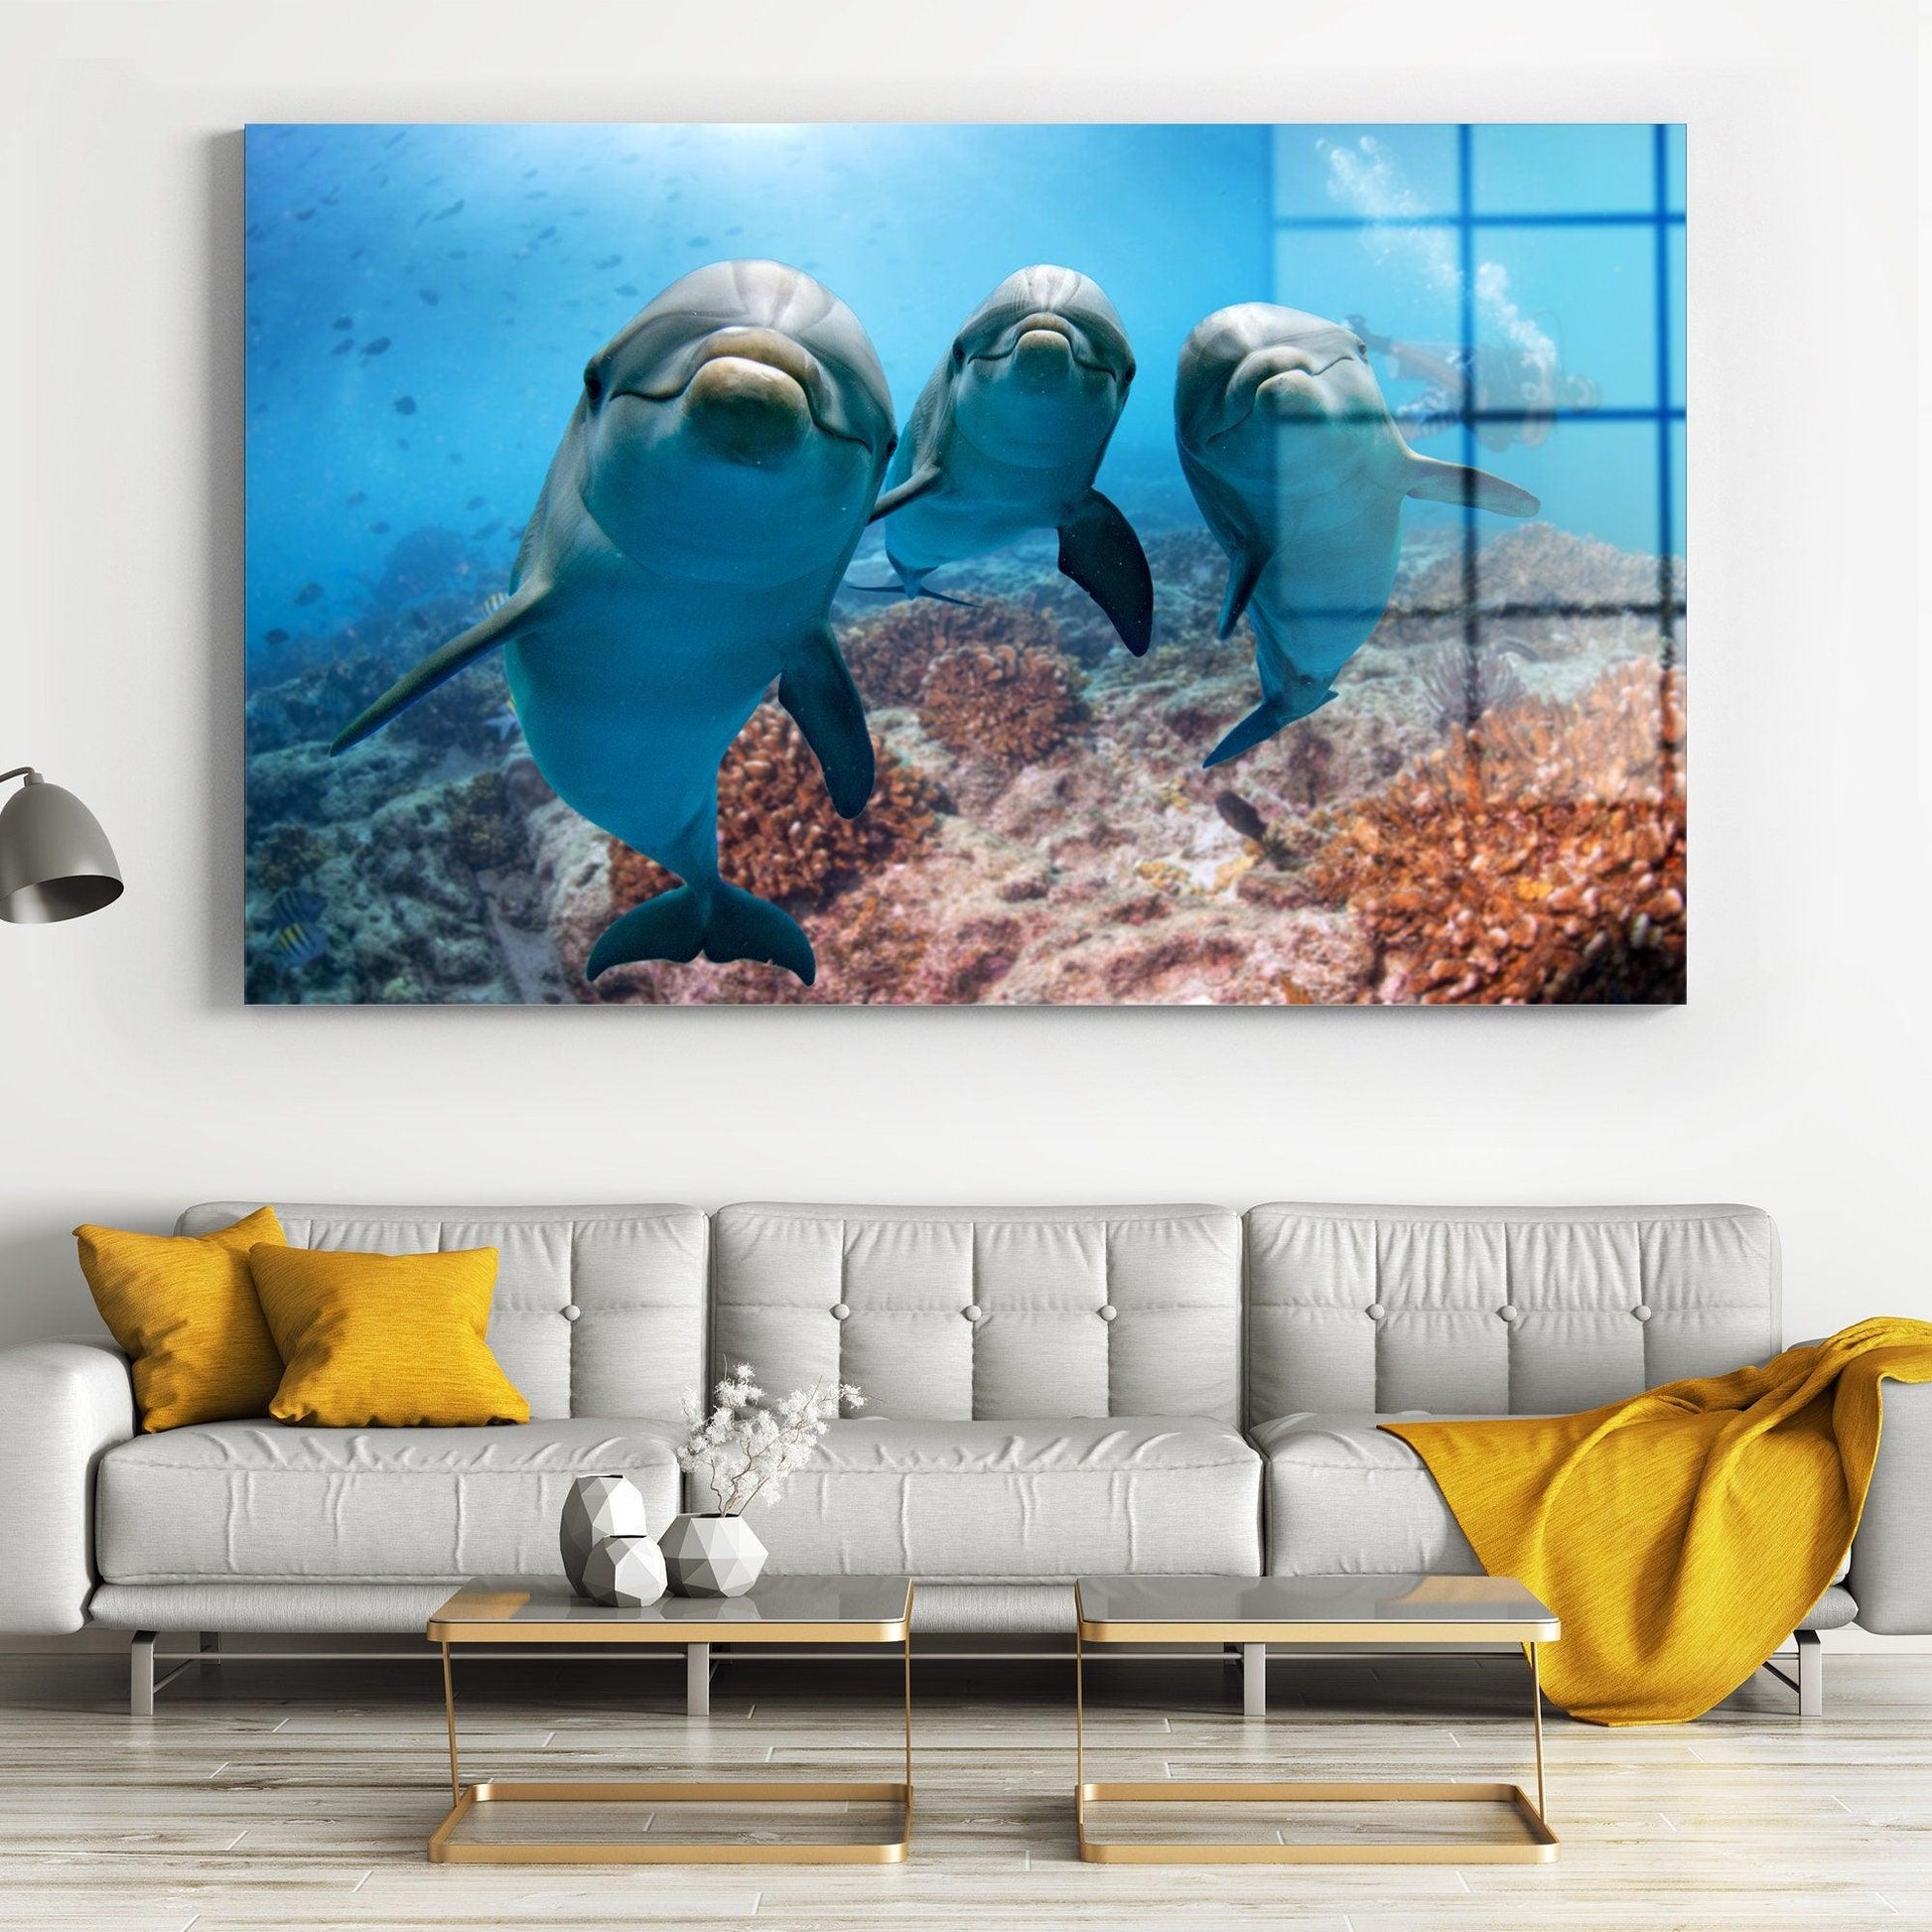 A lovely dolphins Canvas Wall Art Design | Large Canvas Stunning Image of Ocean Dwellers for Decor Large Wall in House, dolphins glass wall